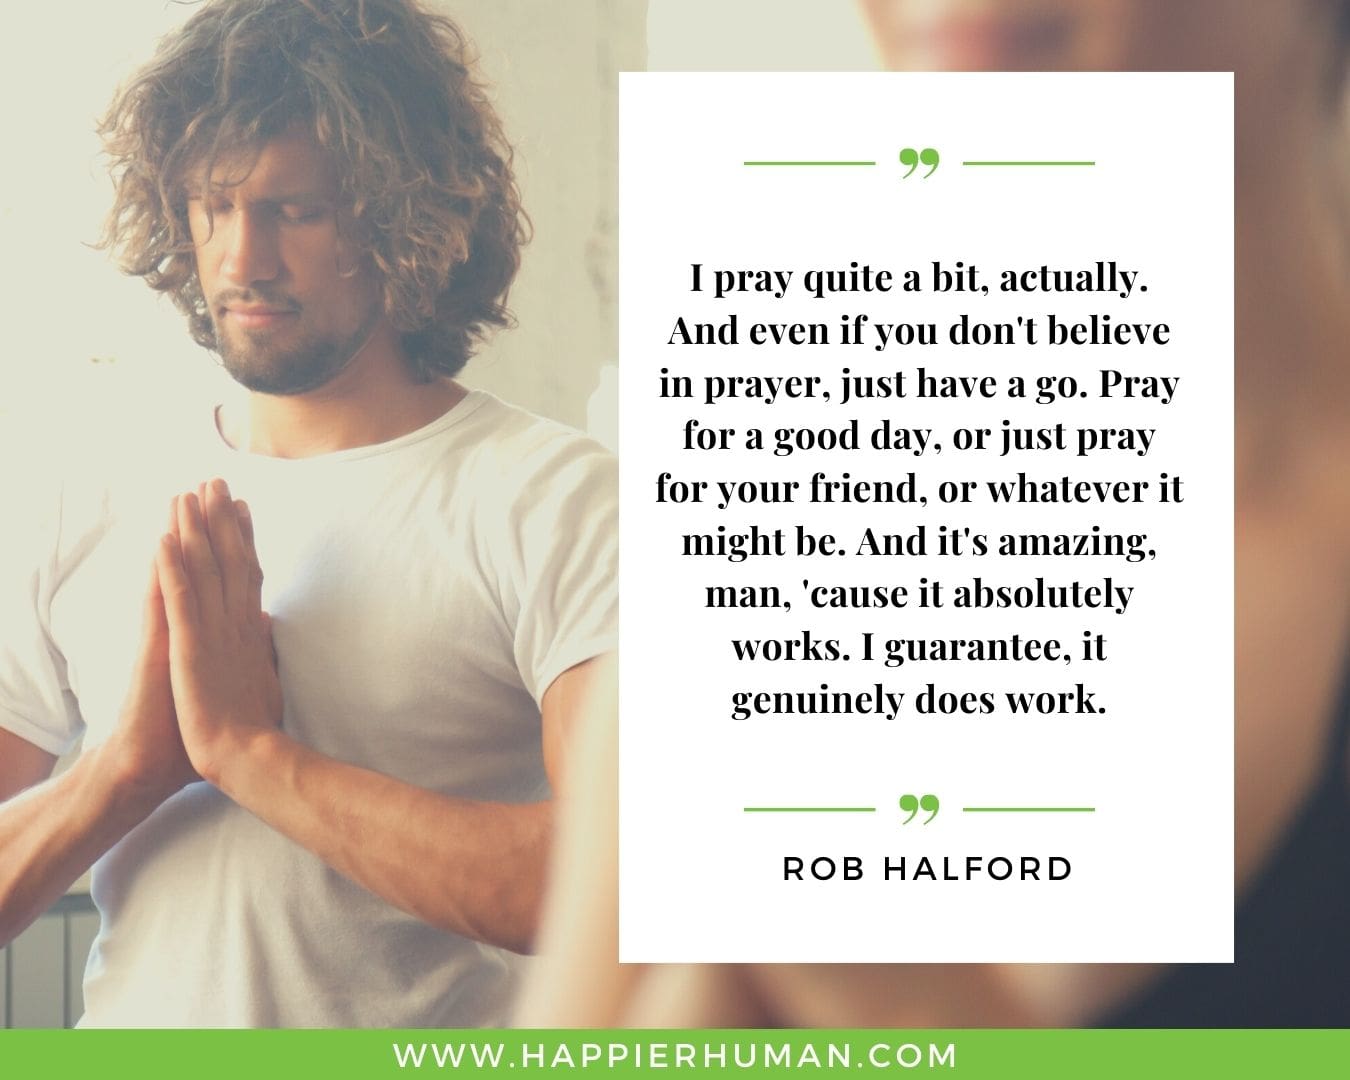 Great Day Quotes - “I pray quite a bit, actually. And even if you don't believe in prayer, just have a go. Pray for a good day, or just pray for your friend, or whatever it might be. And it's amazing, man, 'cause it absolutely works. I guarantee, it genuinely does work.” – Rob Halford